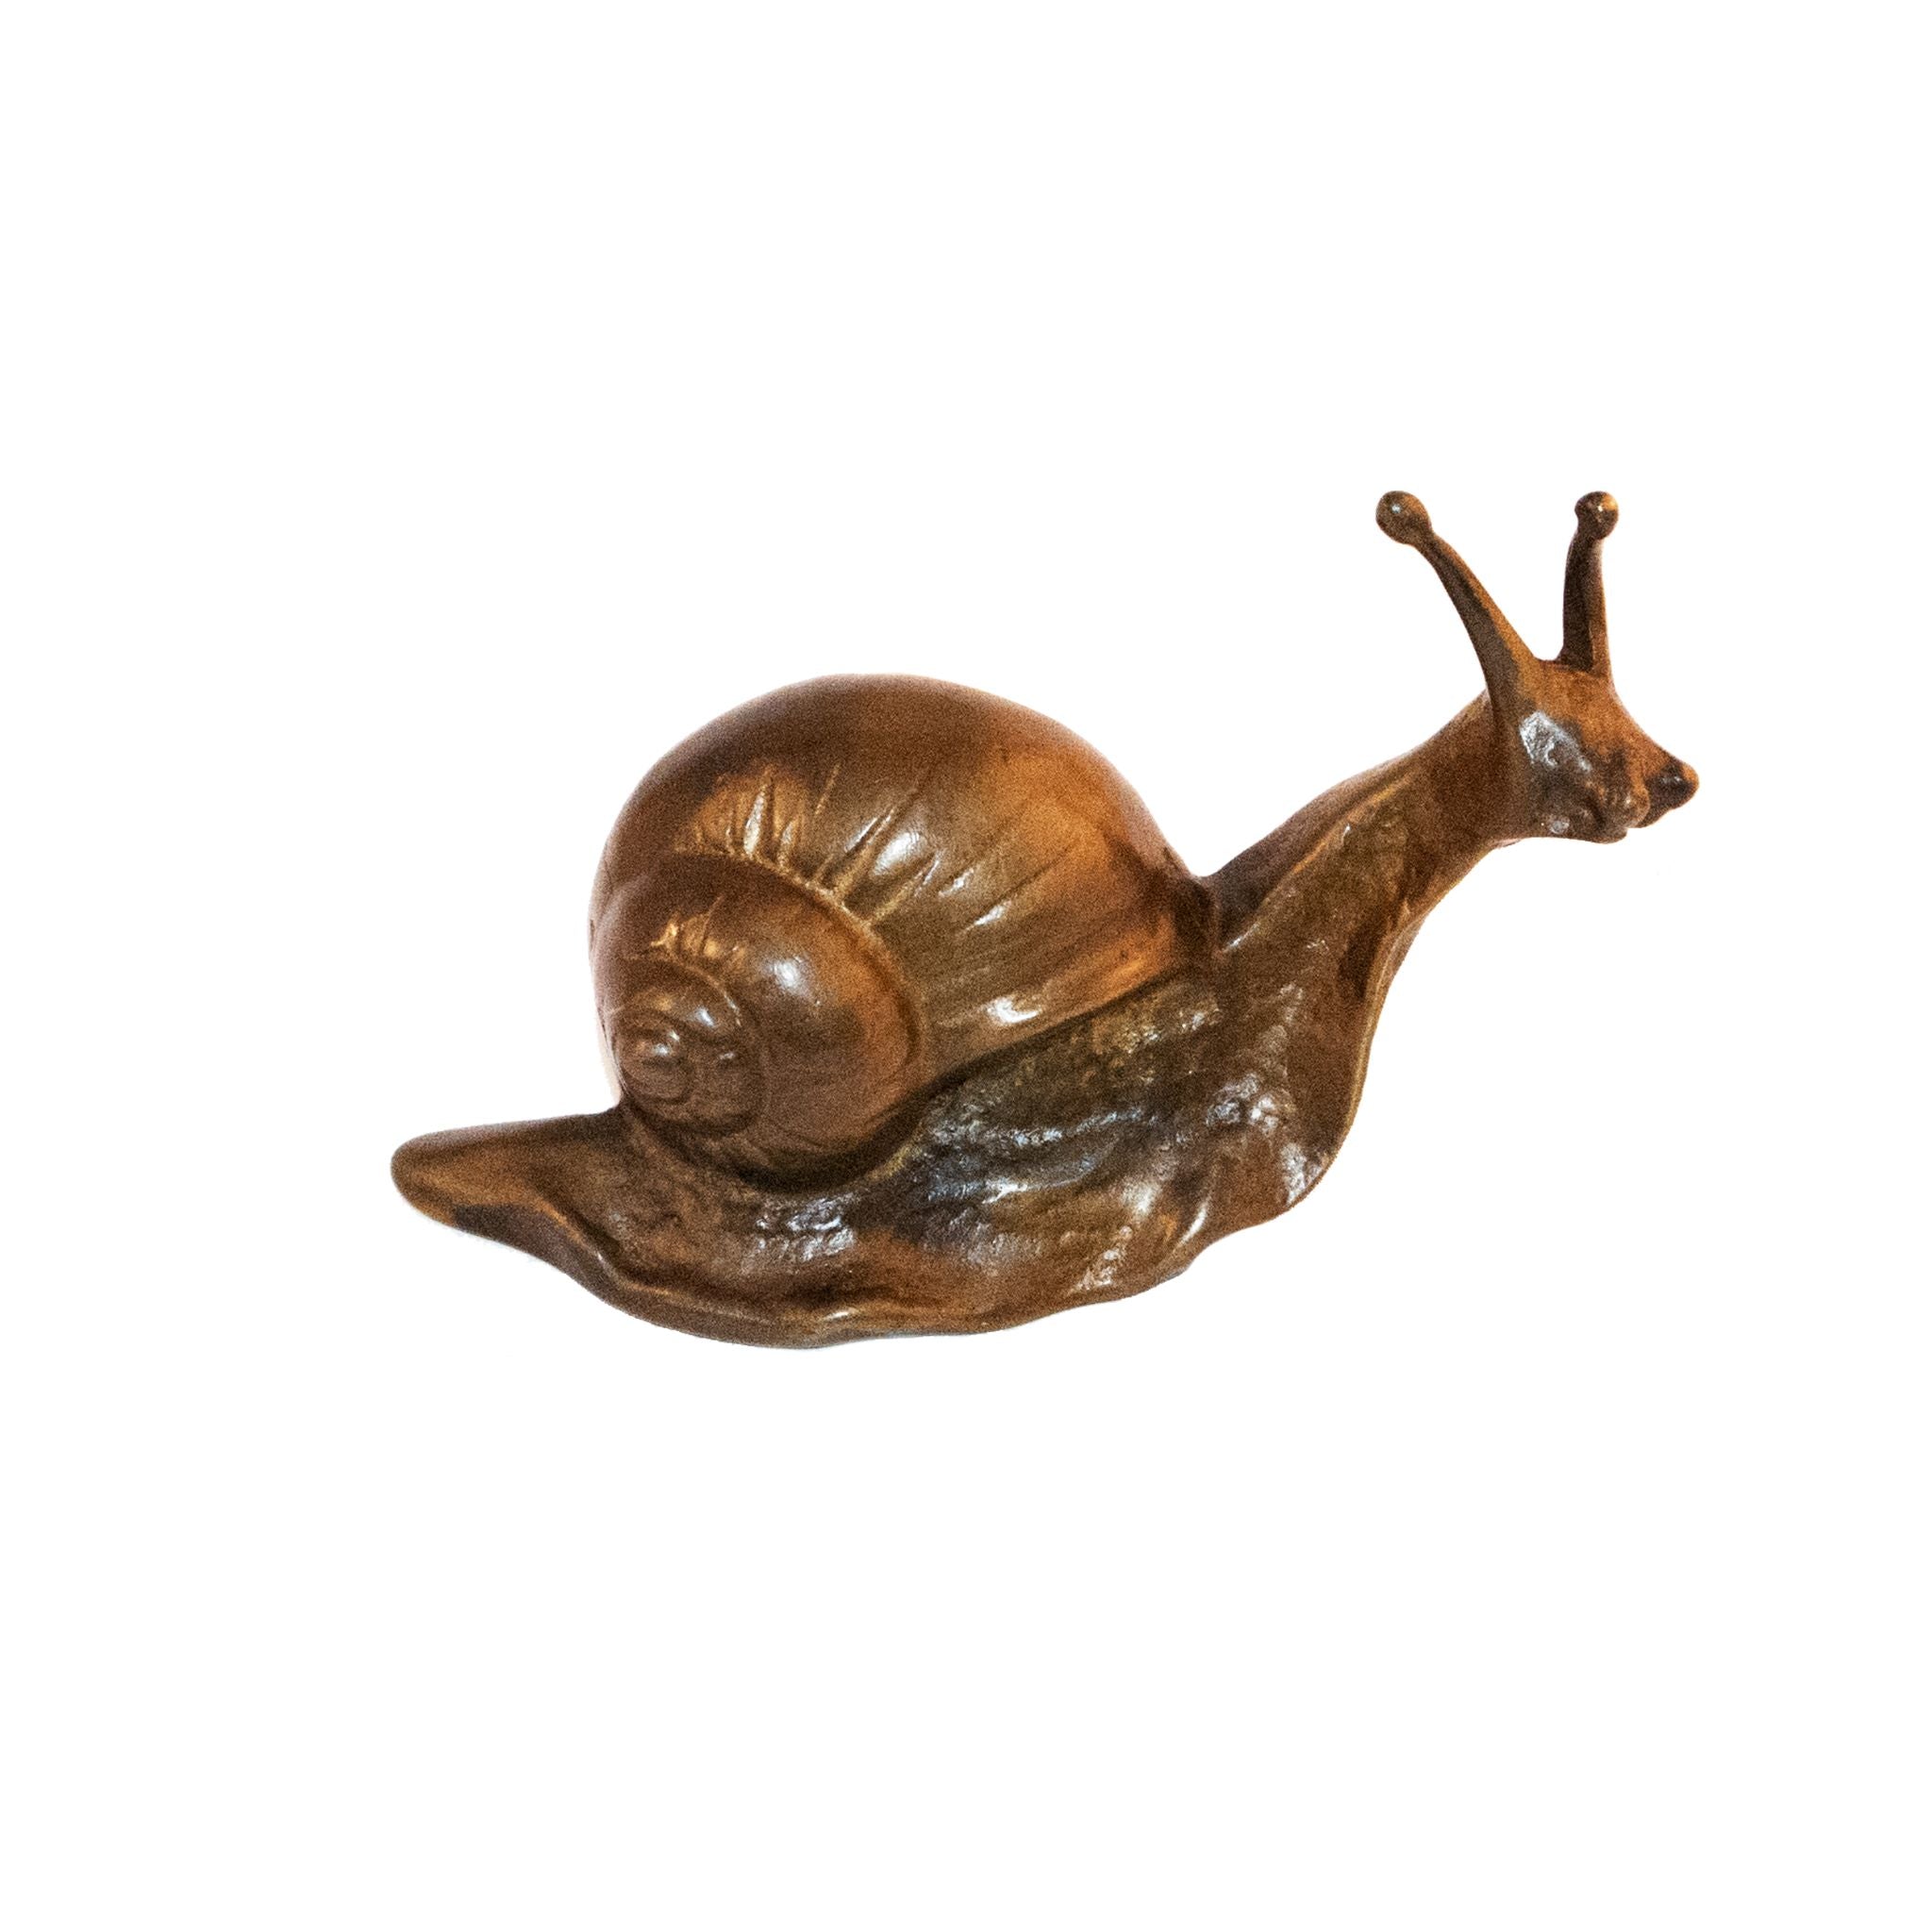 A large brass knob shaped like a snail, featuring detailed craftsmanship.